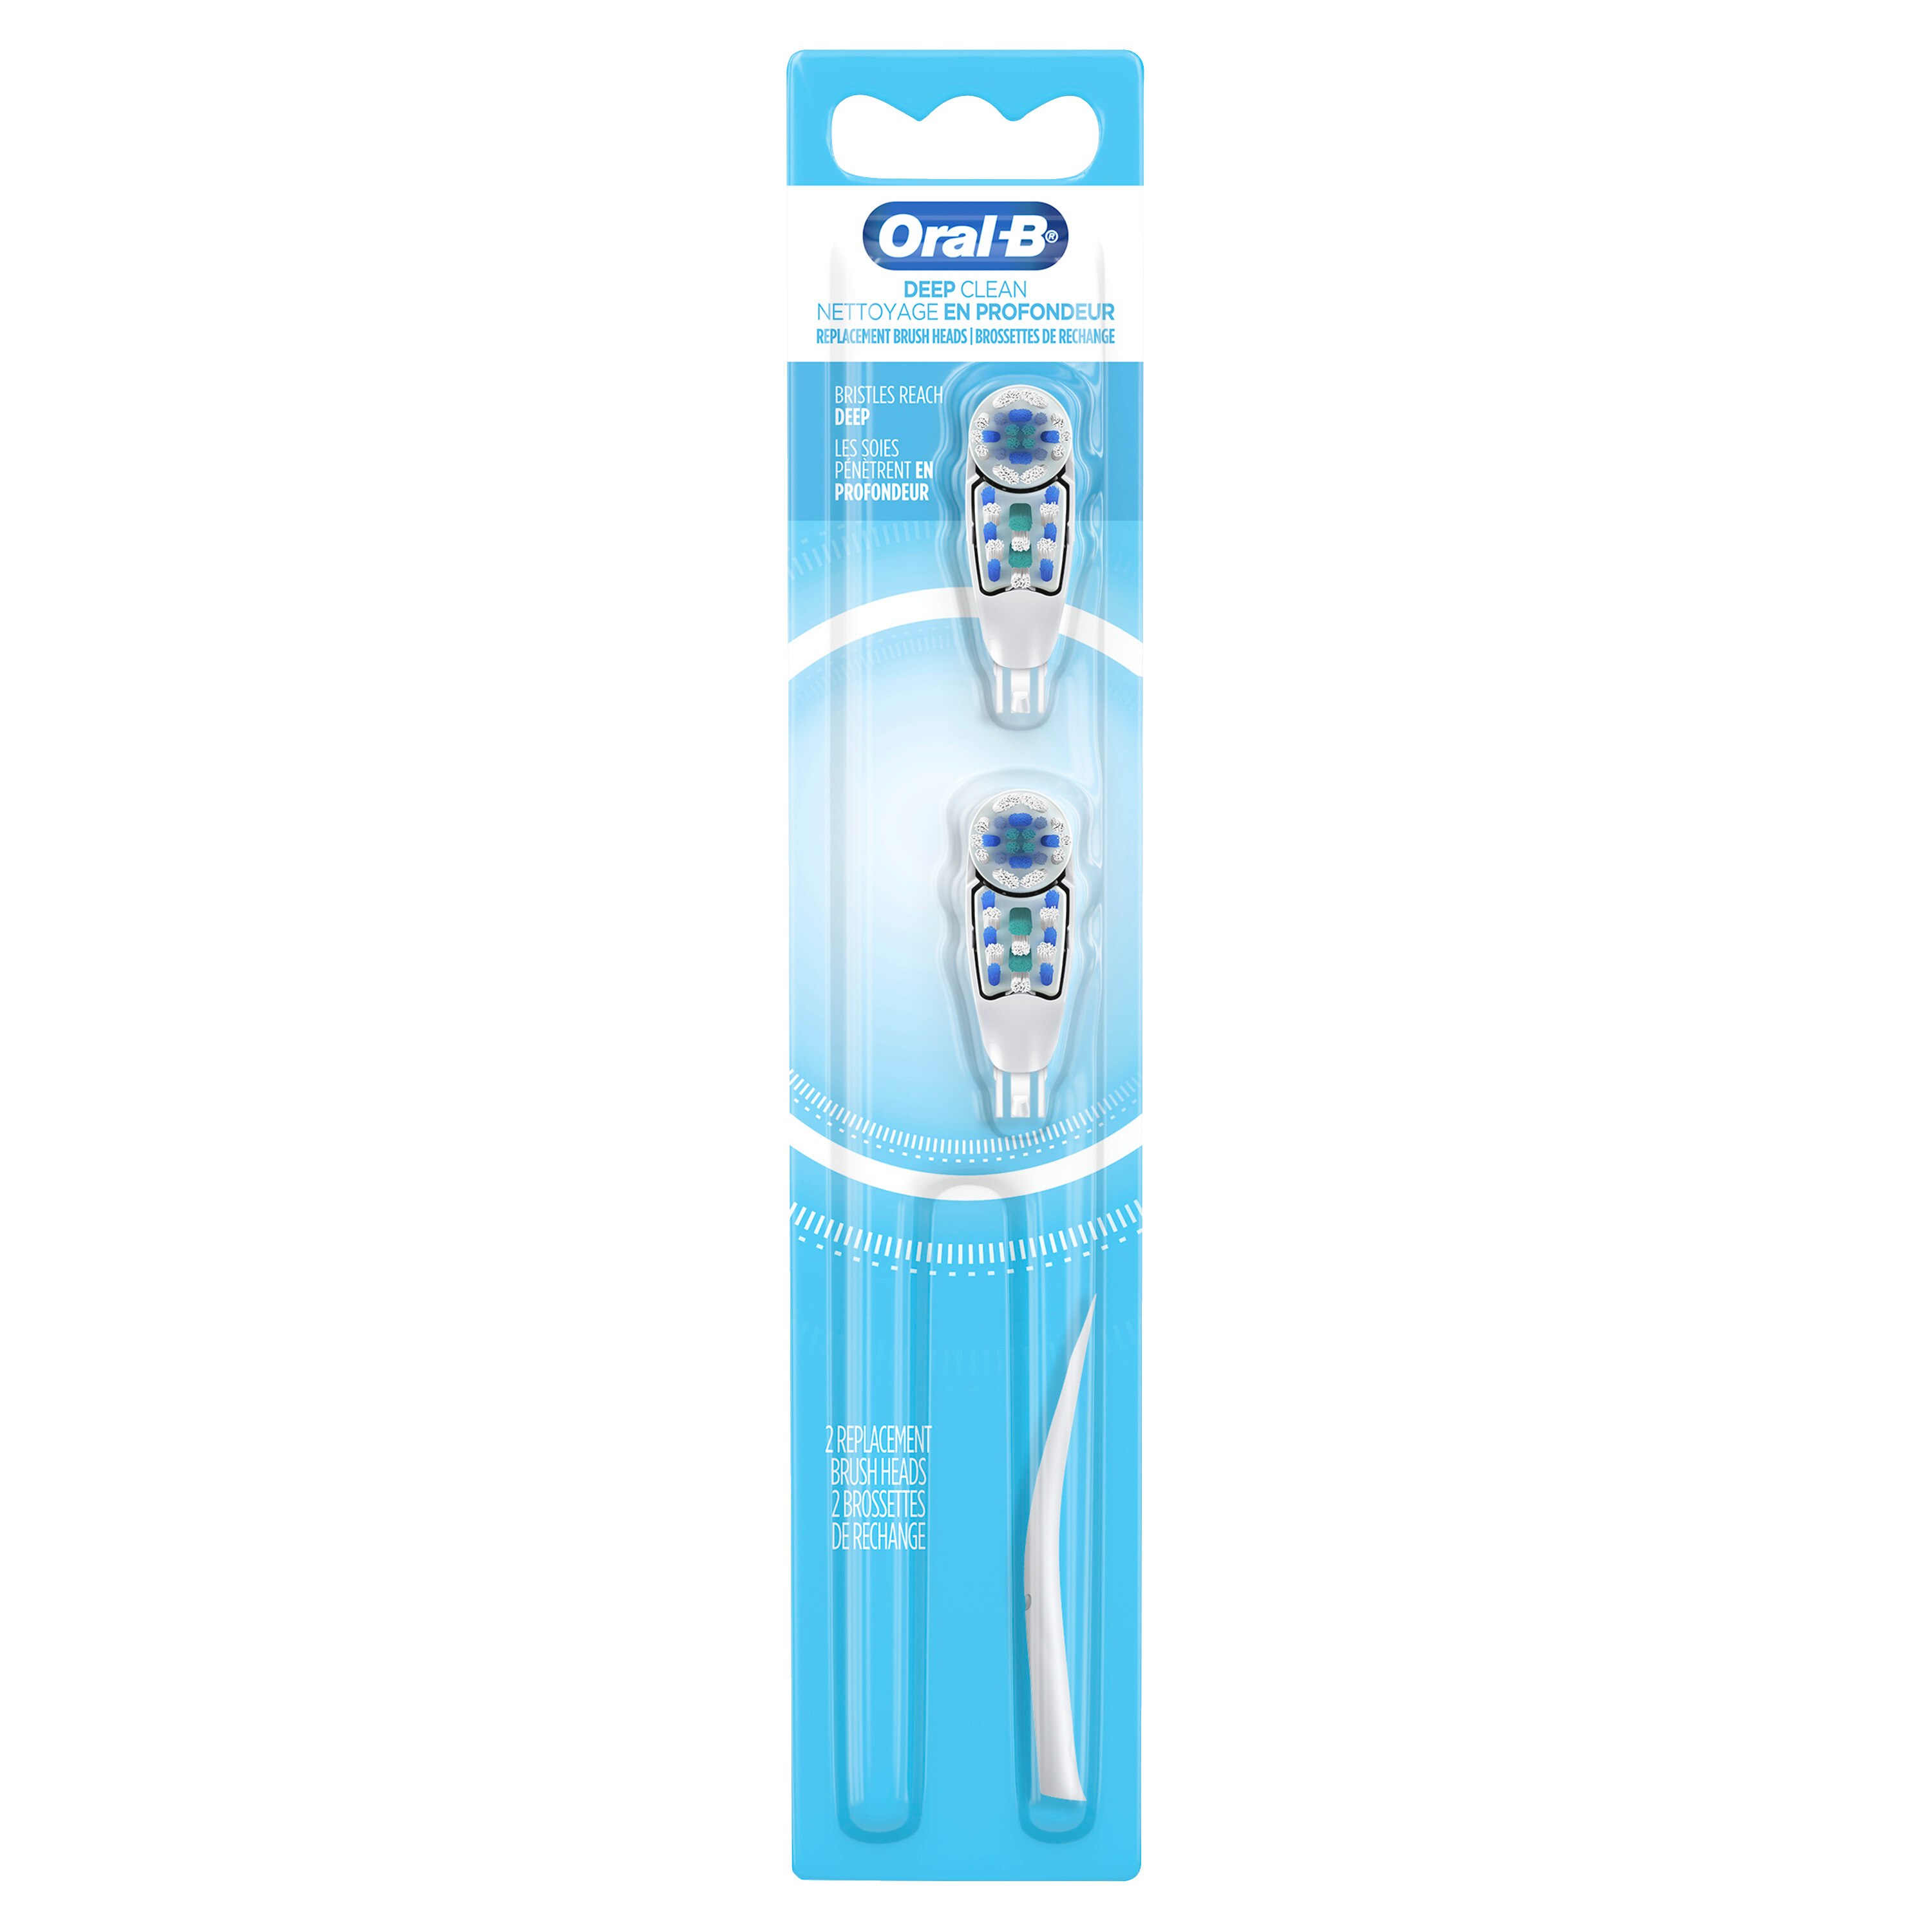 Oral-B Complete Deep Clean Battery Powered Toothbrush Replacement Brush Heads, 2/Pack